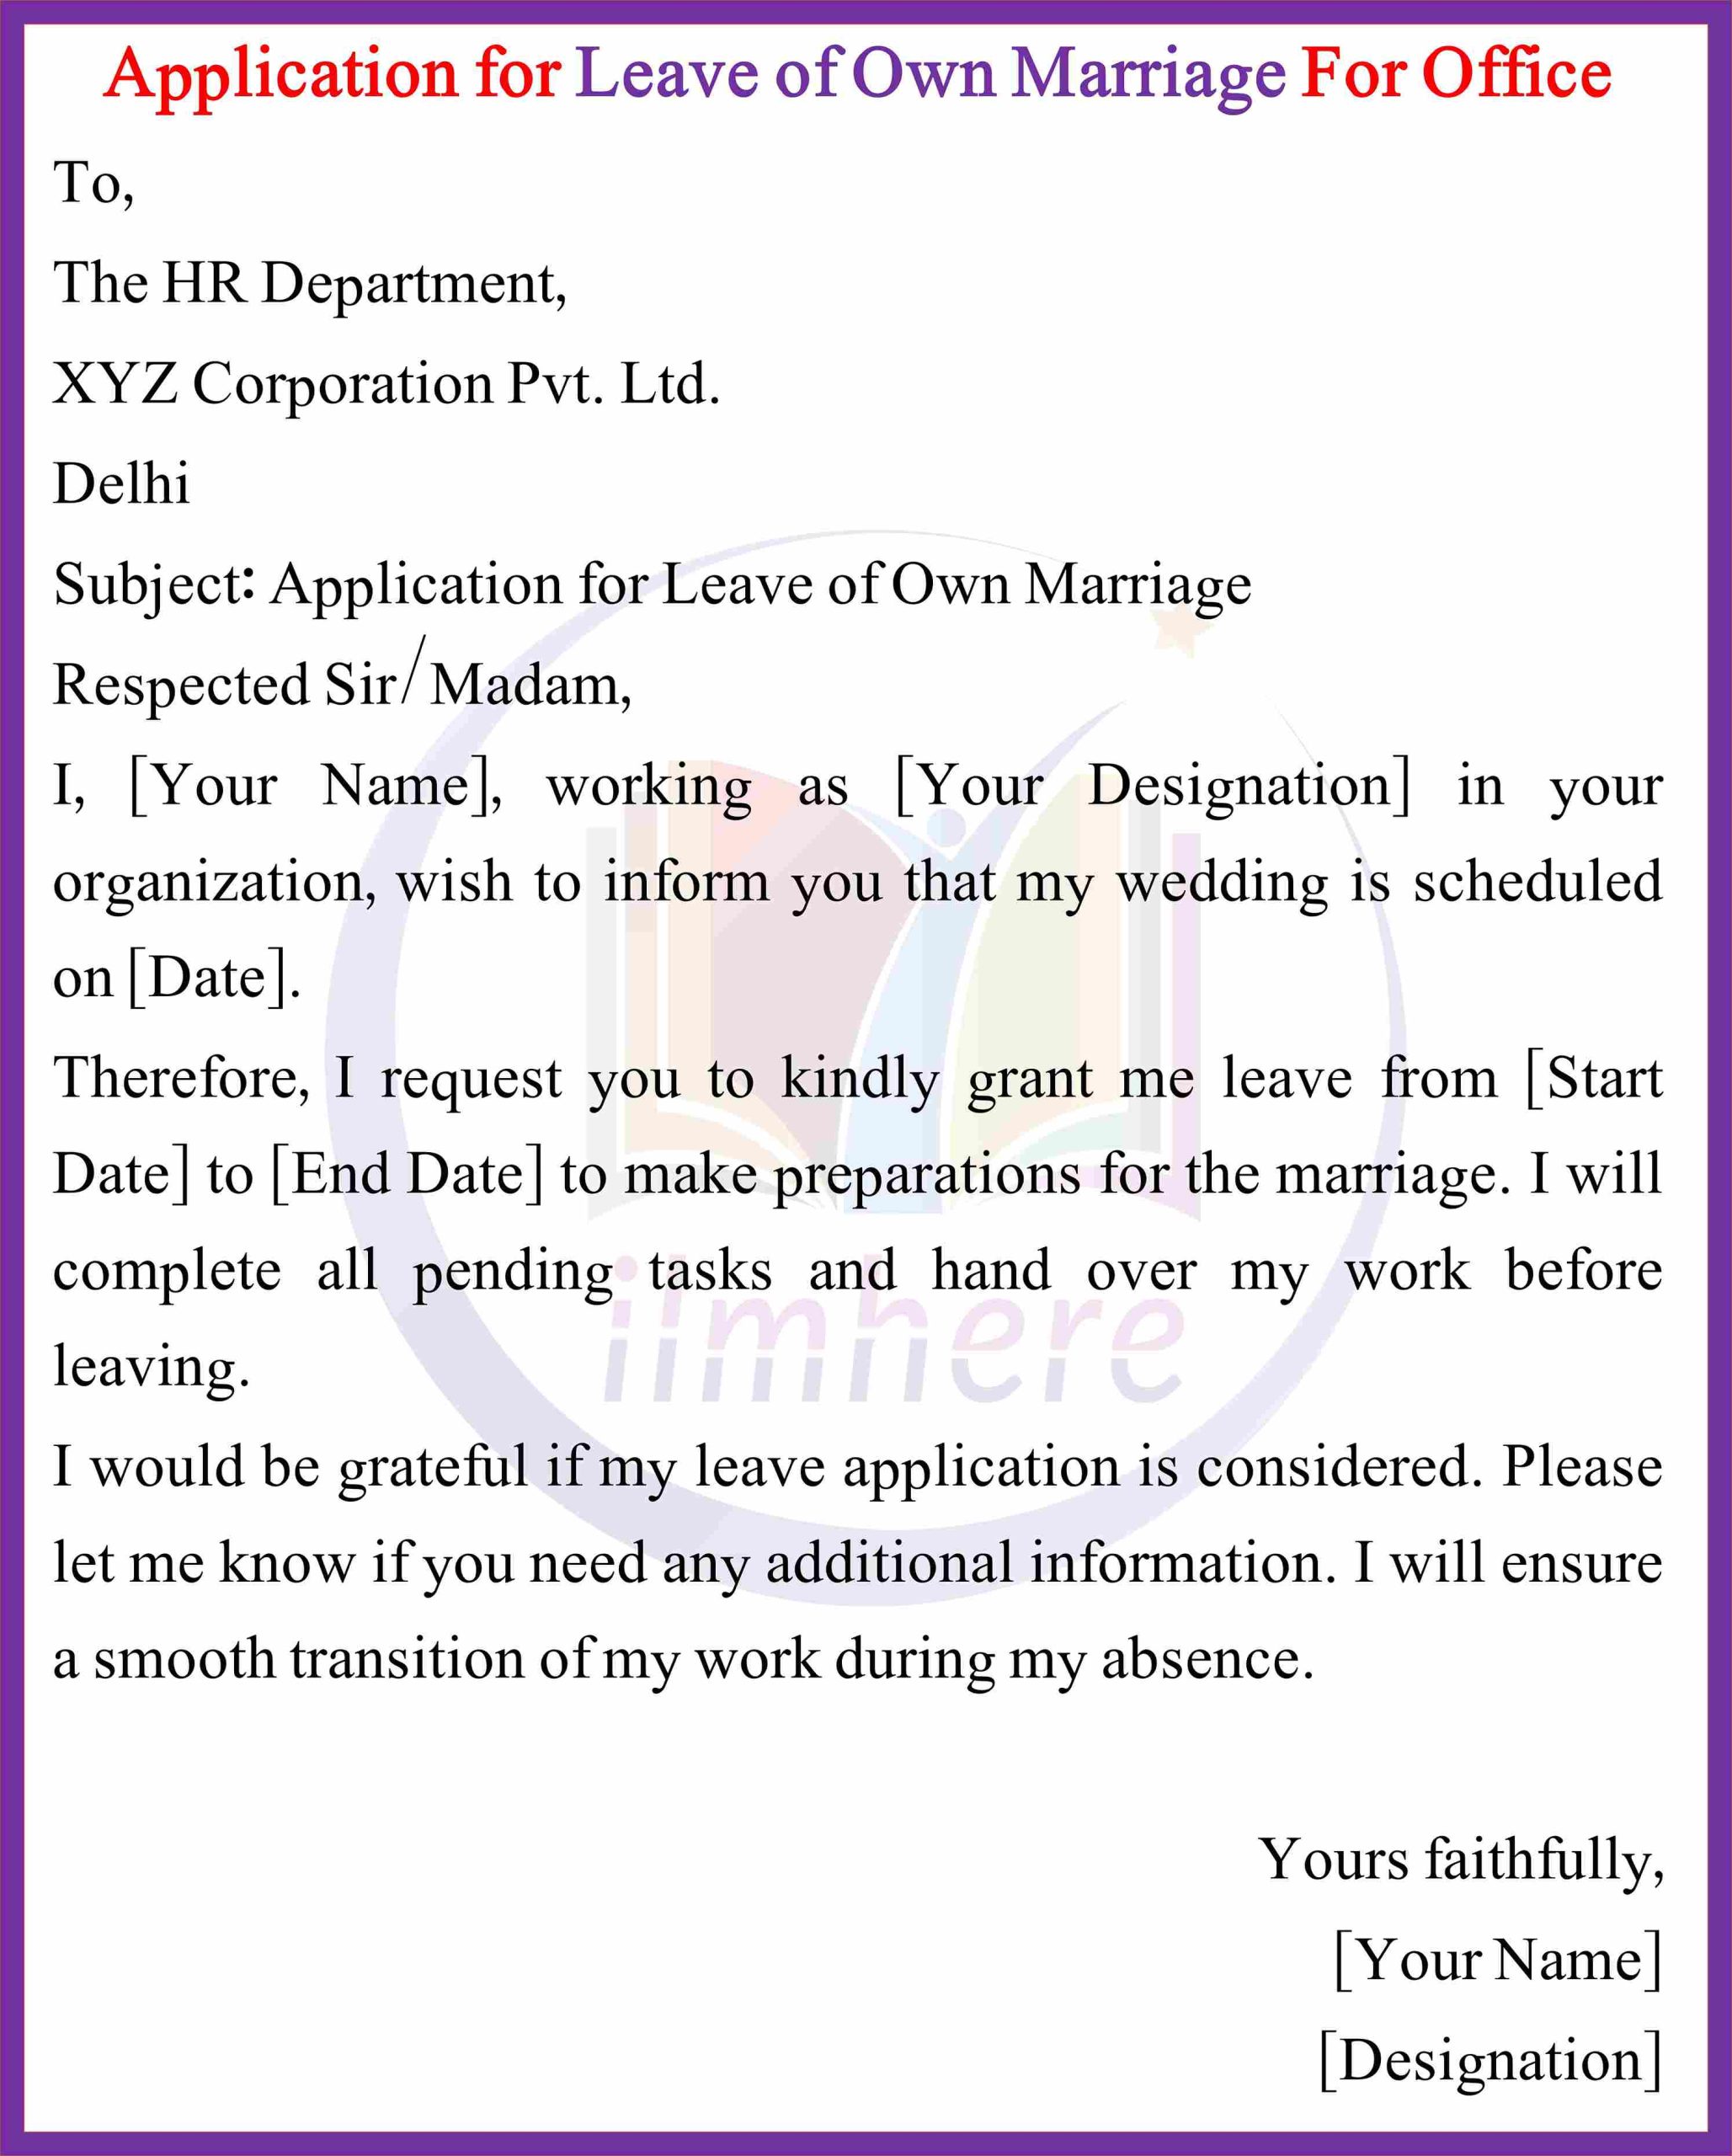 Self-marriage leave application For Office